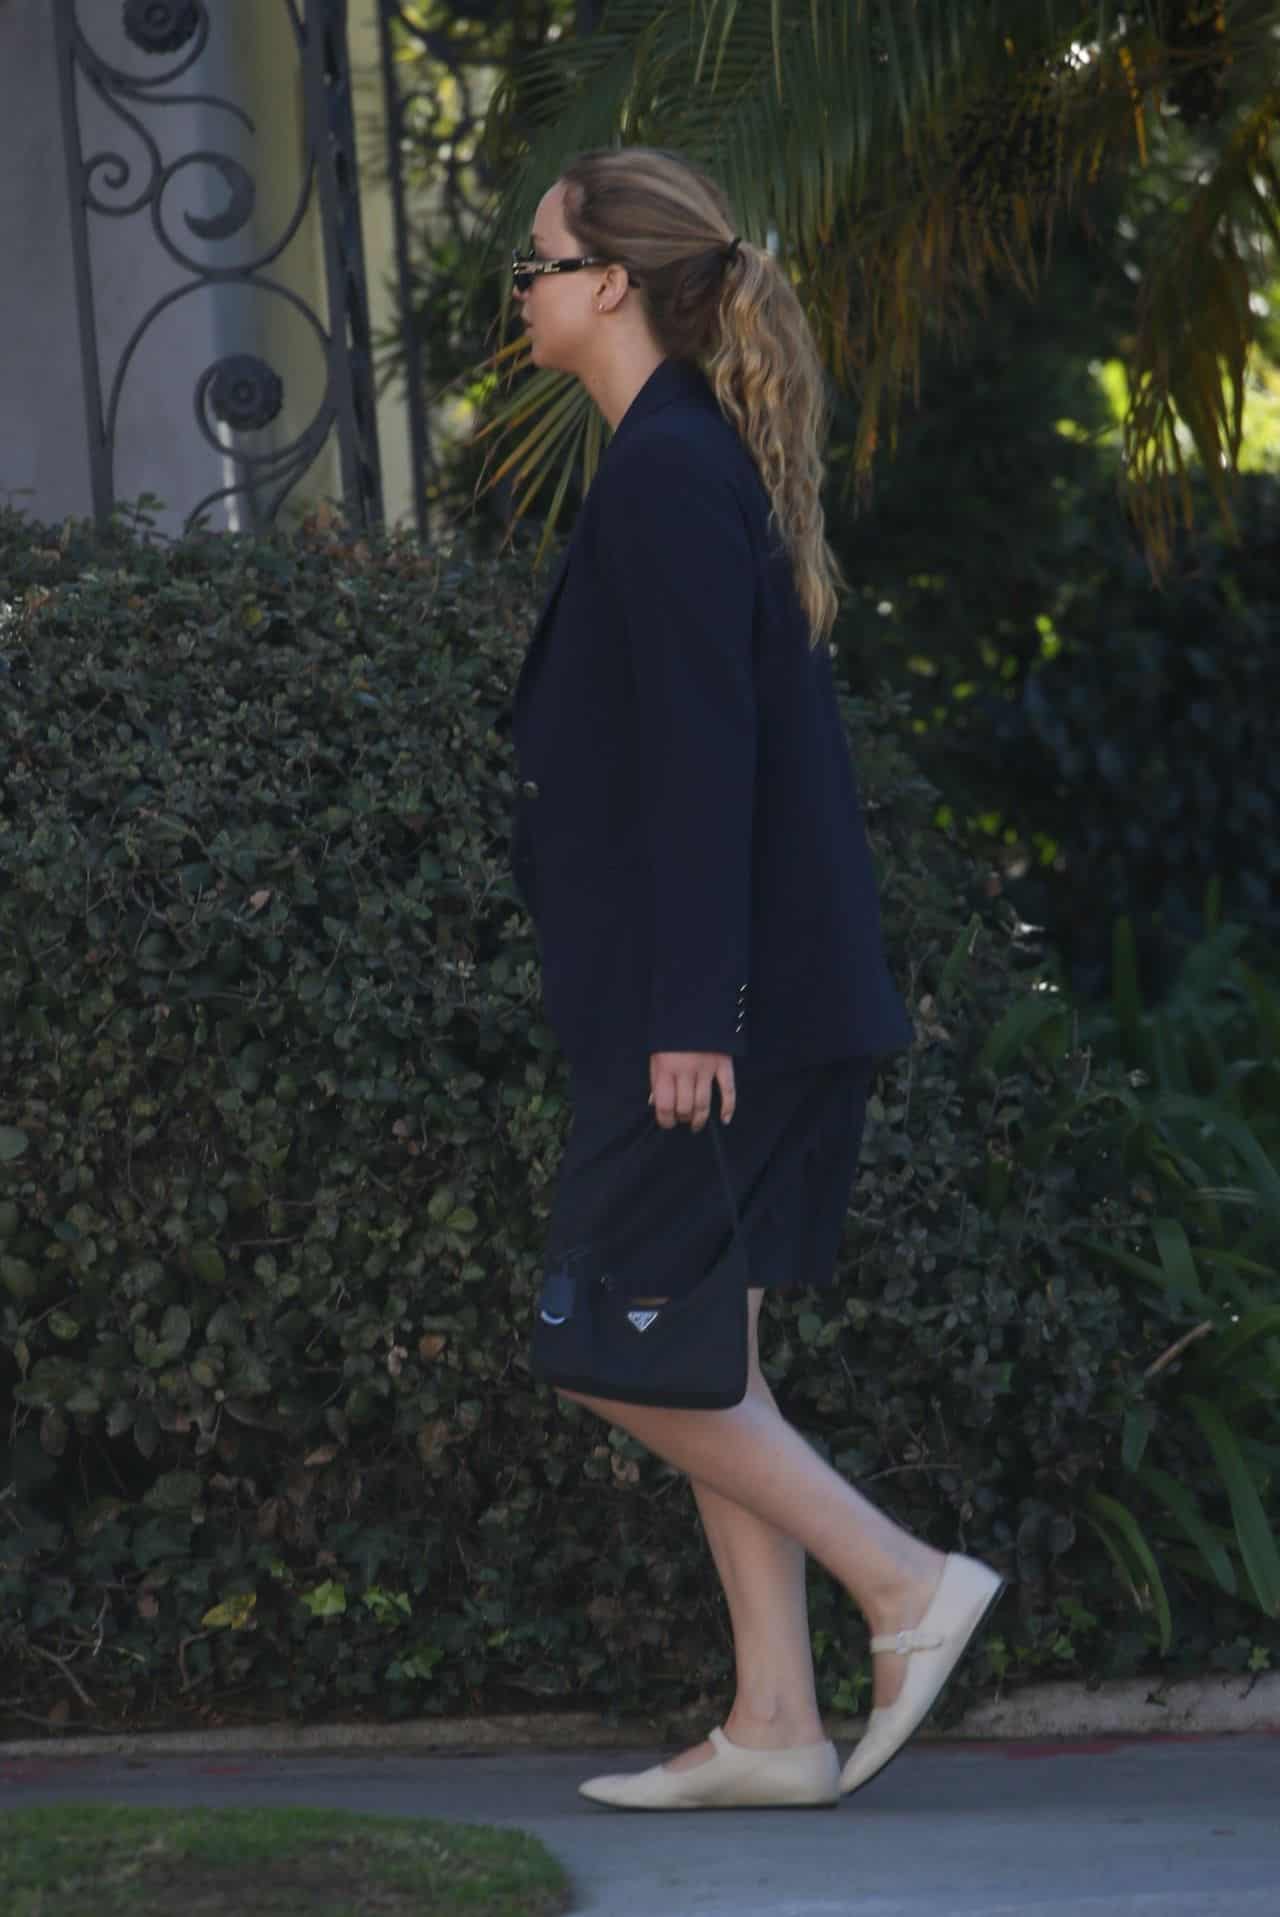 Jennifer Lawrence Looks Business-like in a Navy Suit in Beverly Hills